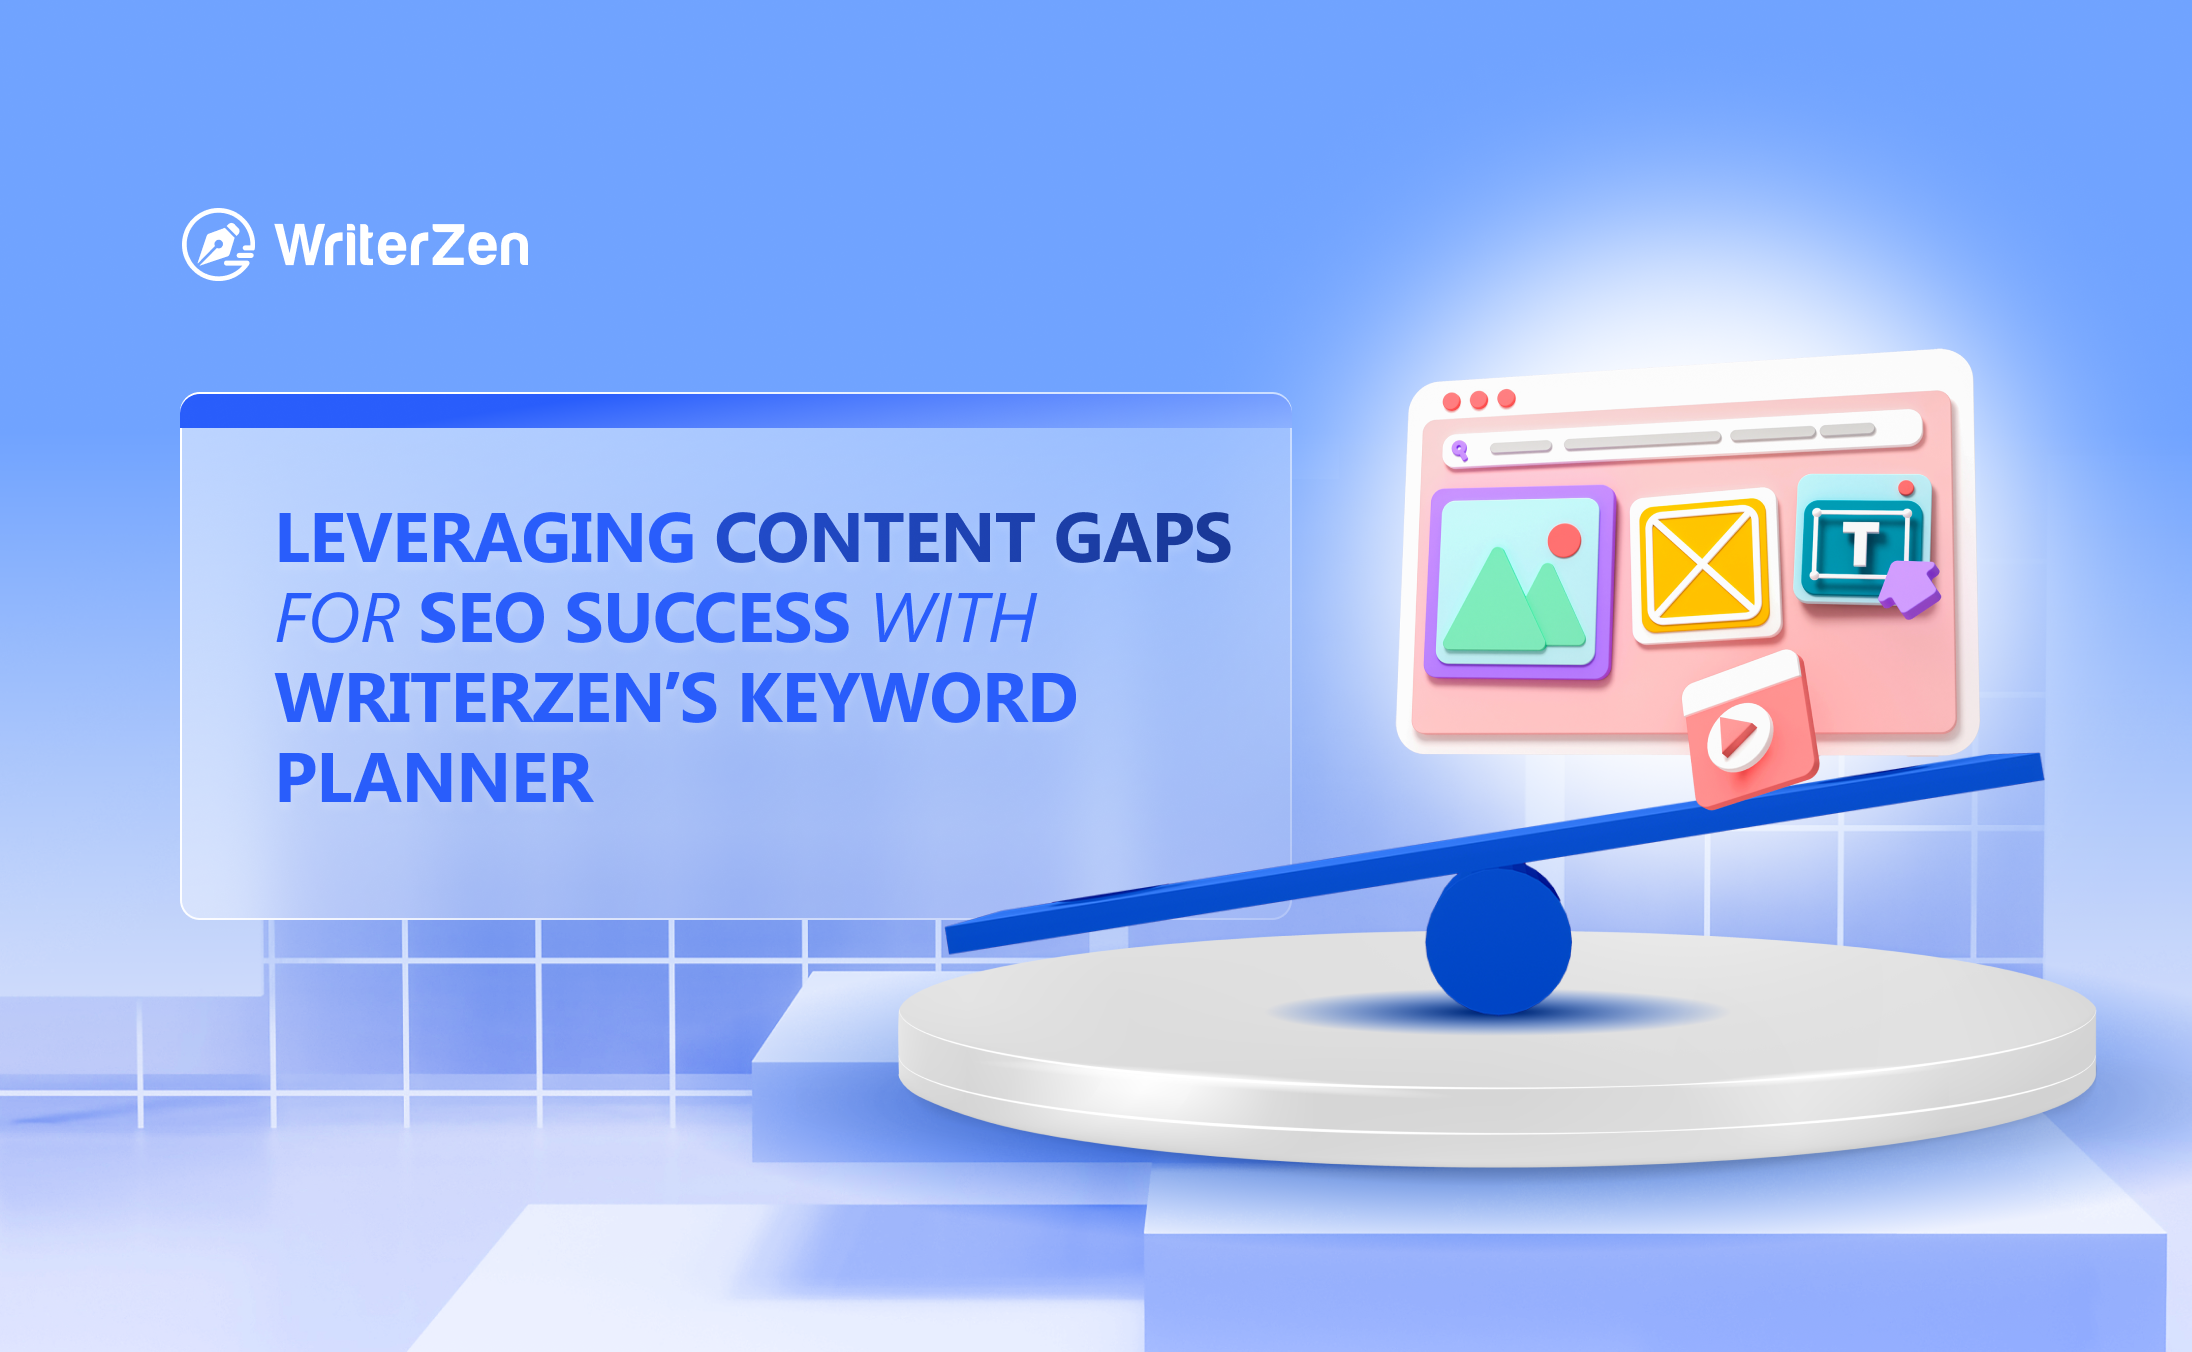 Leveraging Content Gaps for SEO Success with WriterZen’s Keyword Planner